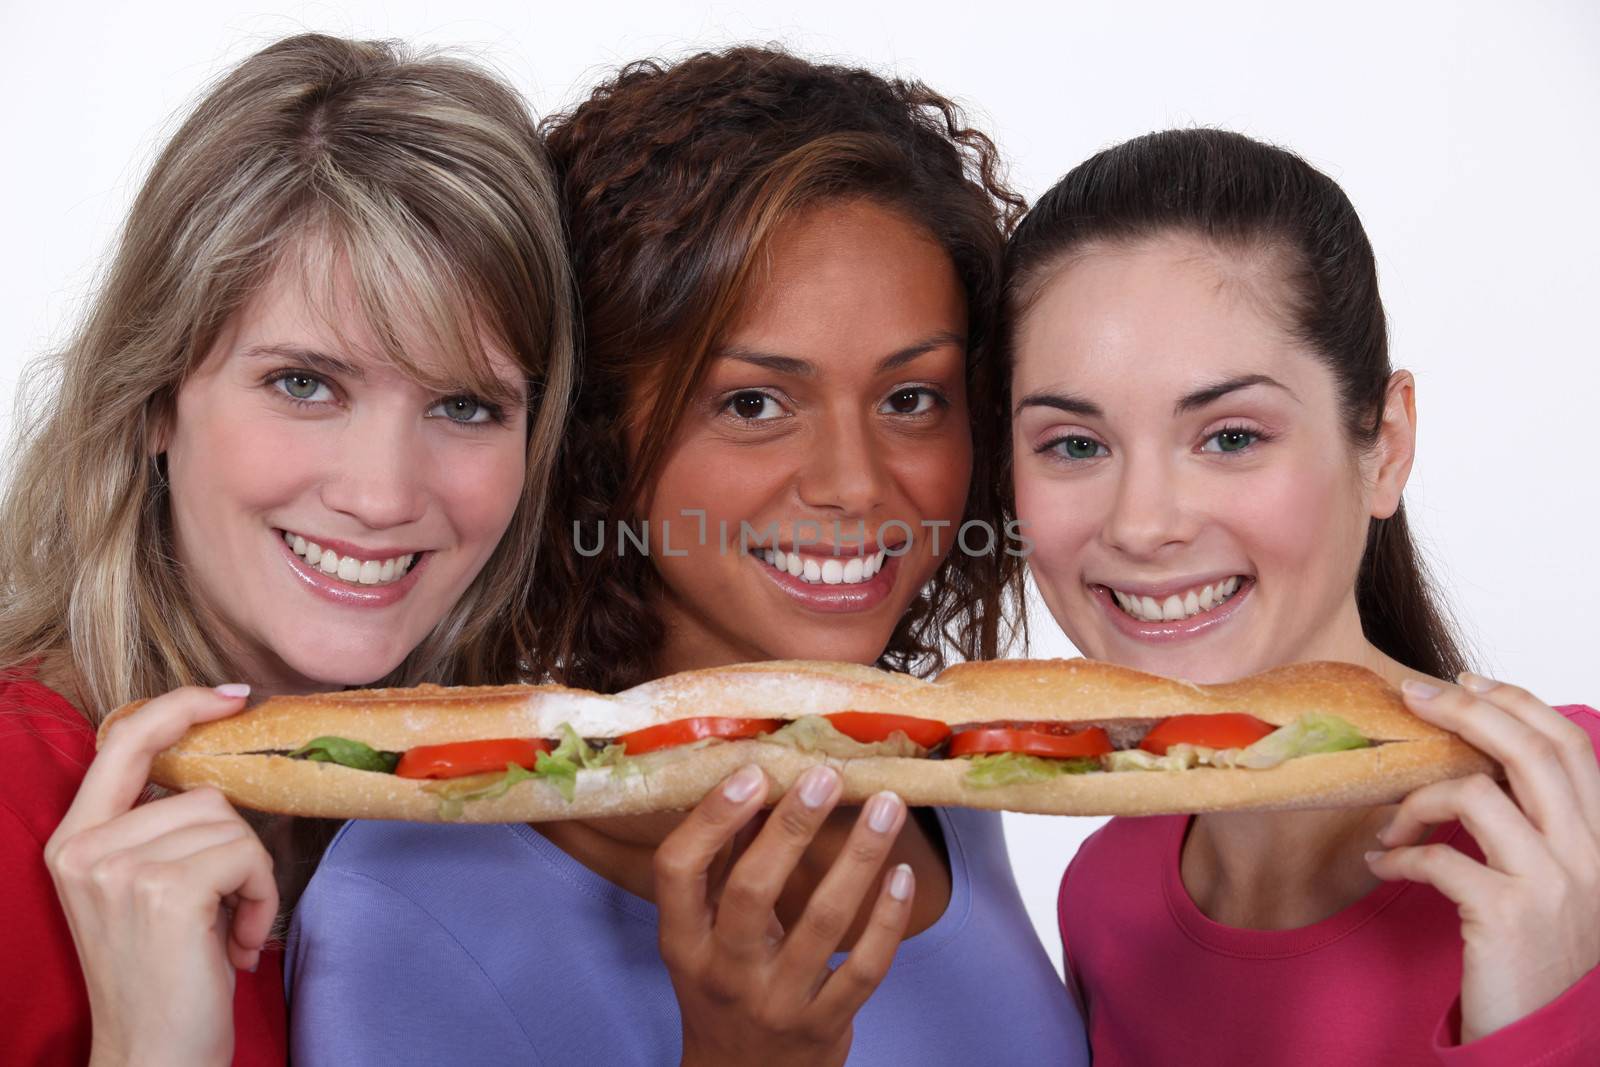 trio of girls eating giant sandwich by phovoir